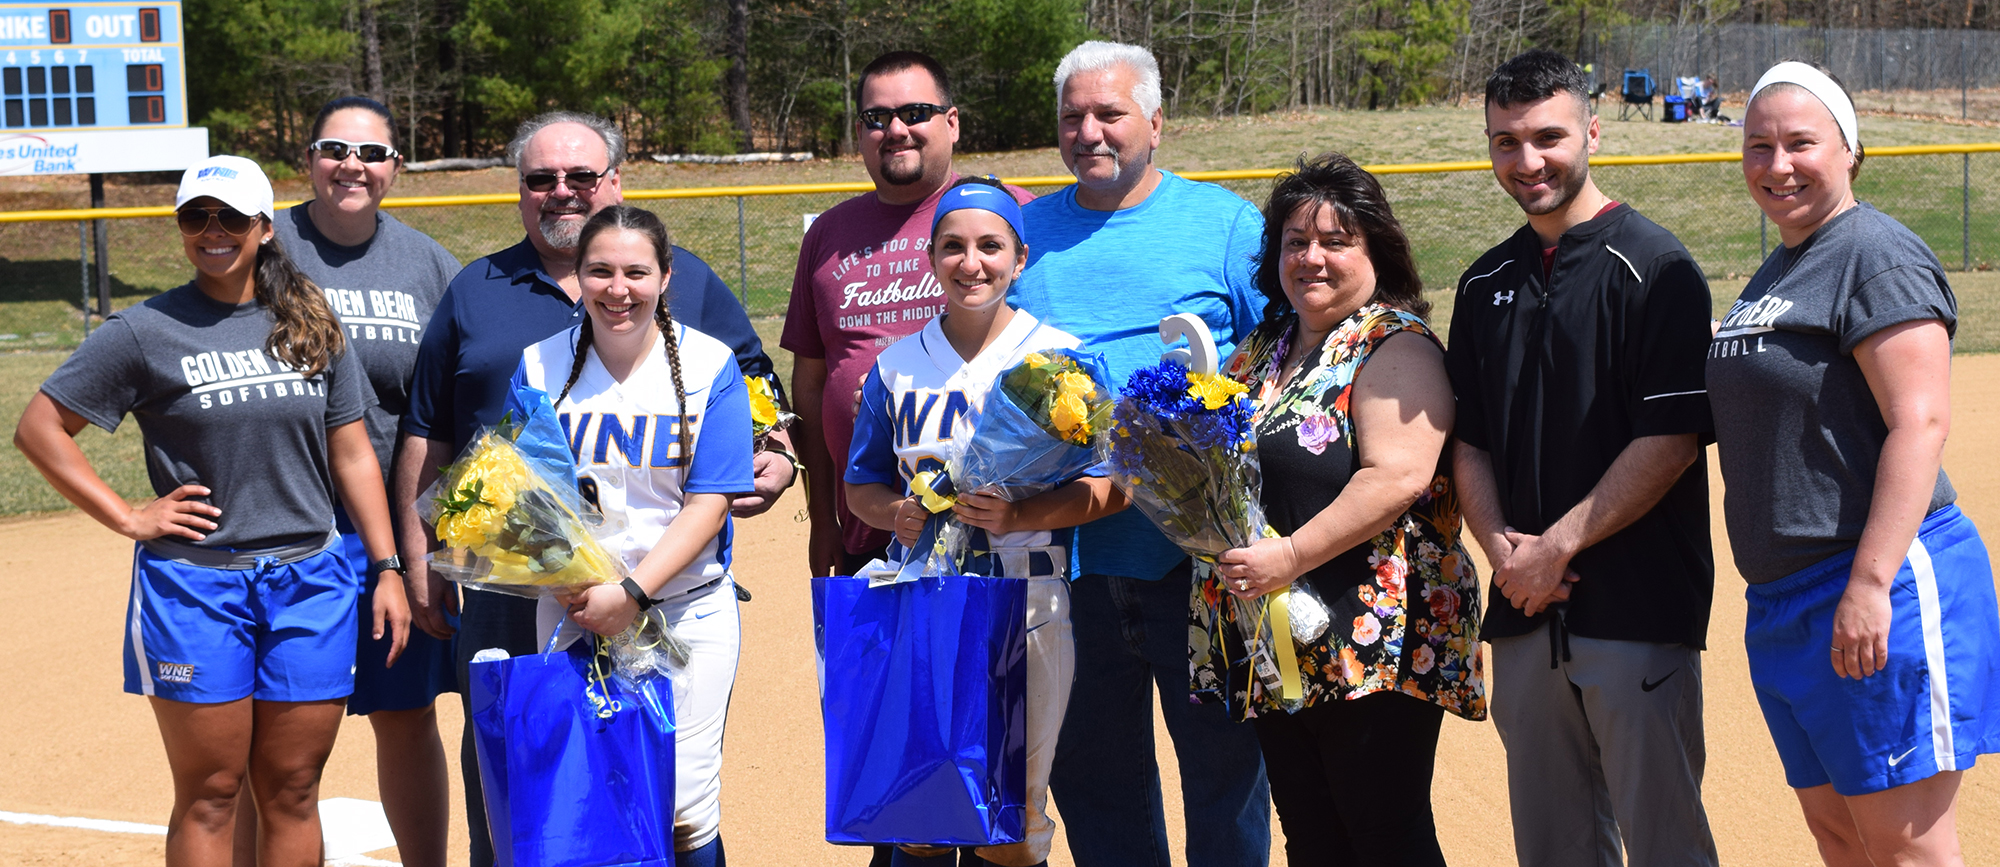 Western New England honored seniors Ashley Rivest and Giovanna Russo before the start of Saturday's doubleheader against Salve Regina. (Photo by Rachael Margossian)